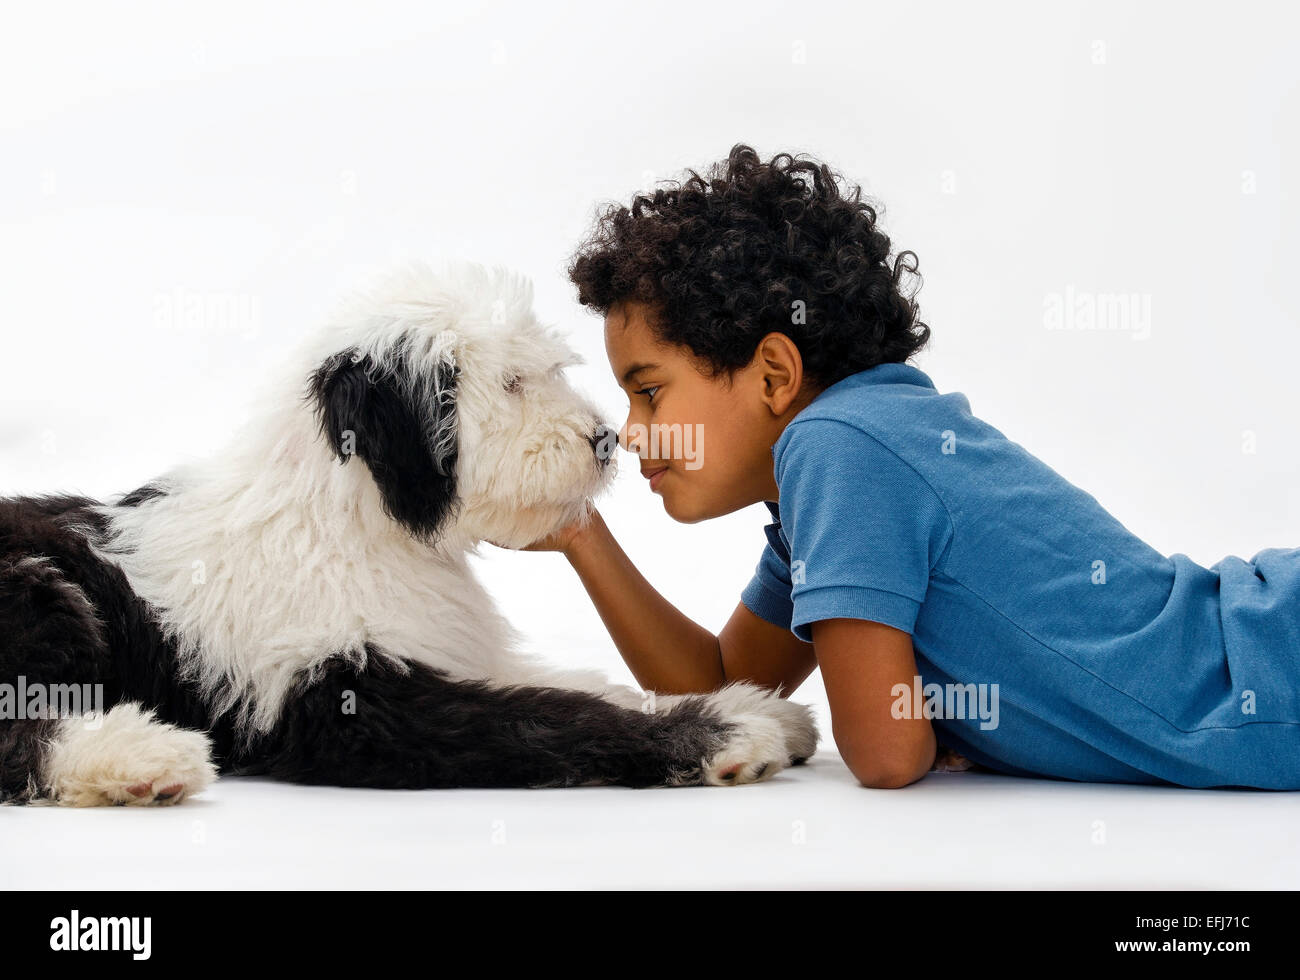 Boy, 8 years, cuddling with an Old English Sheepdog puppy, 4 months Stock Photo